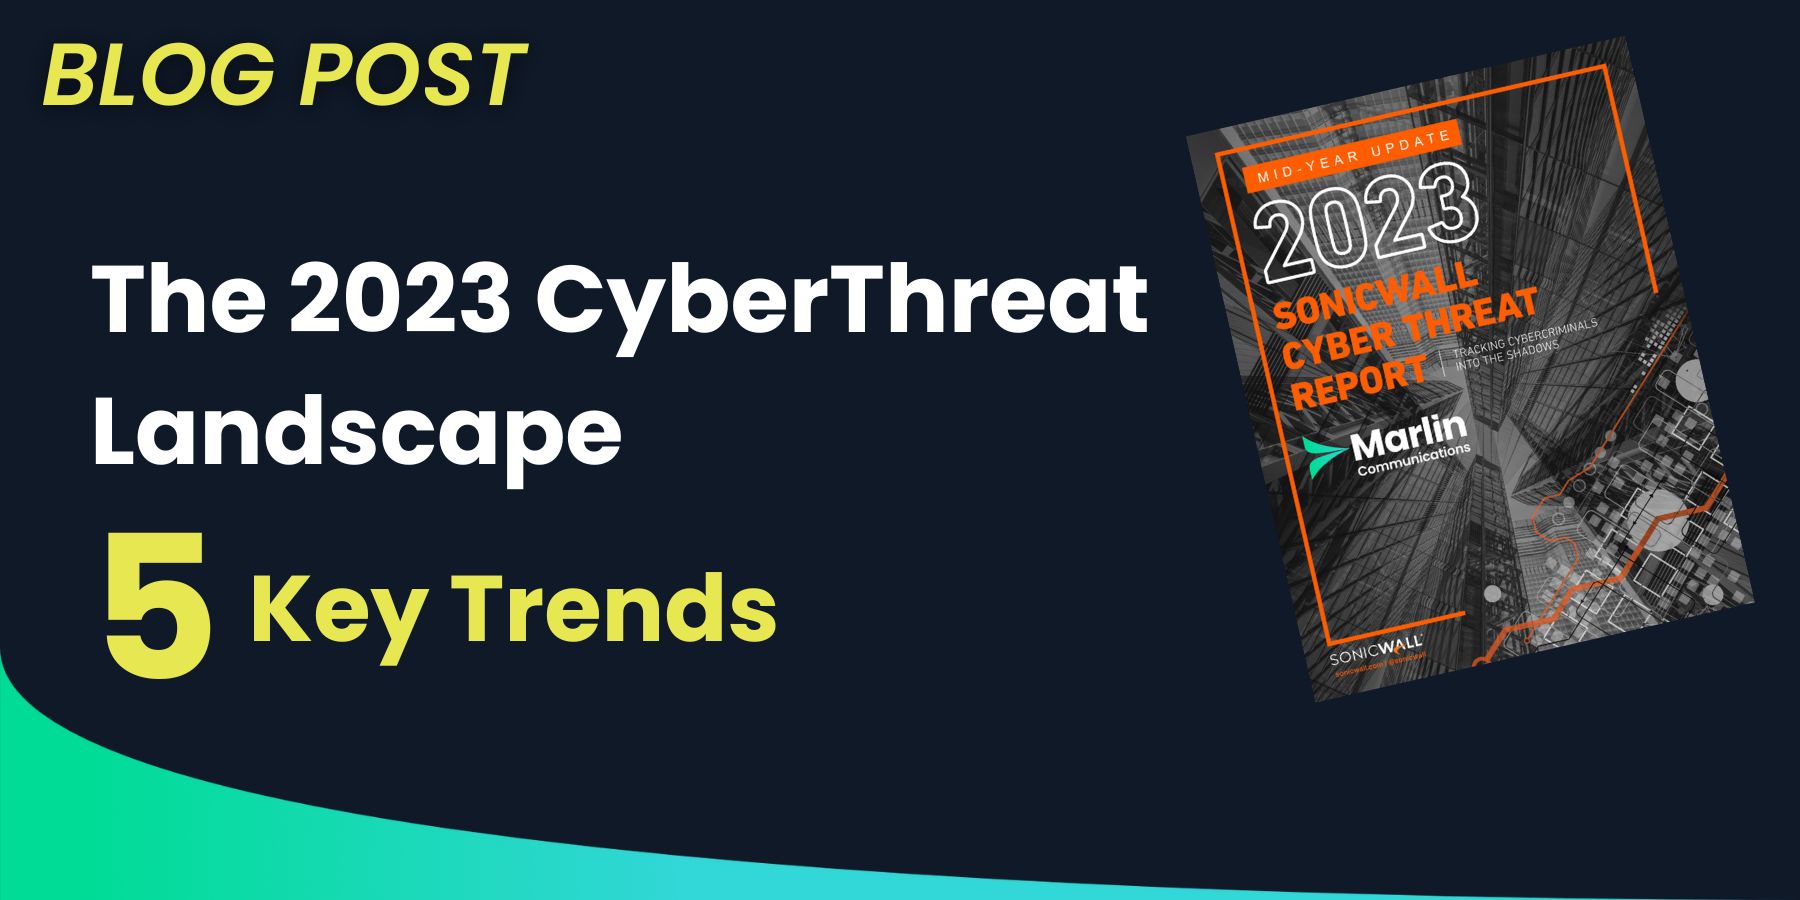 Featured image for “The 2023 Cyber Threat Landscape: 5 Key Trends”